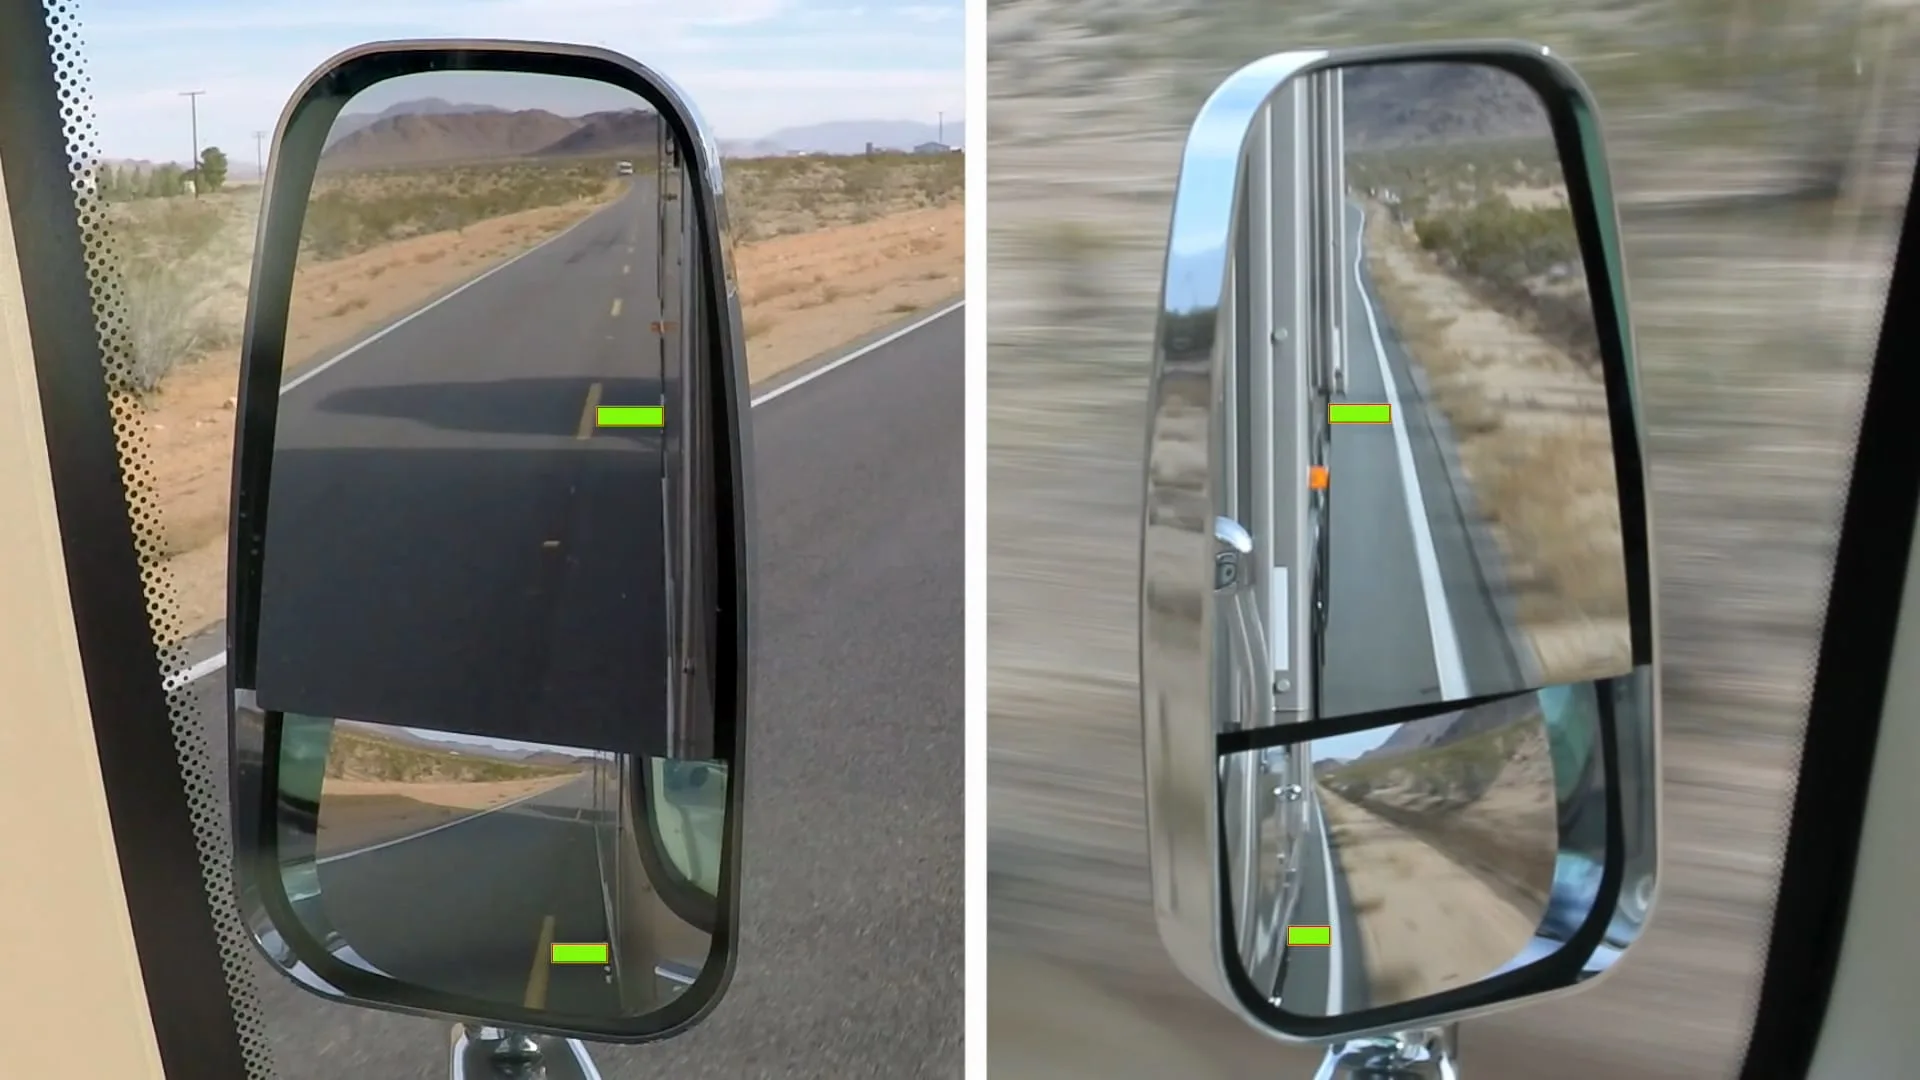 Flat and convex mirrors adjusted to offer information about lane position.